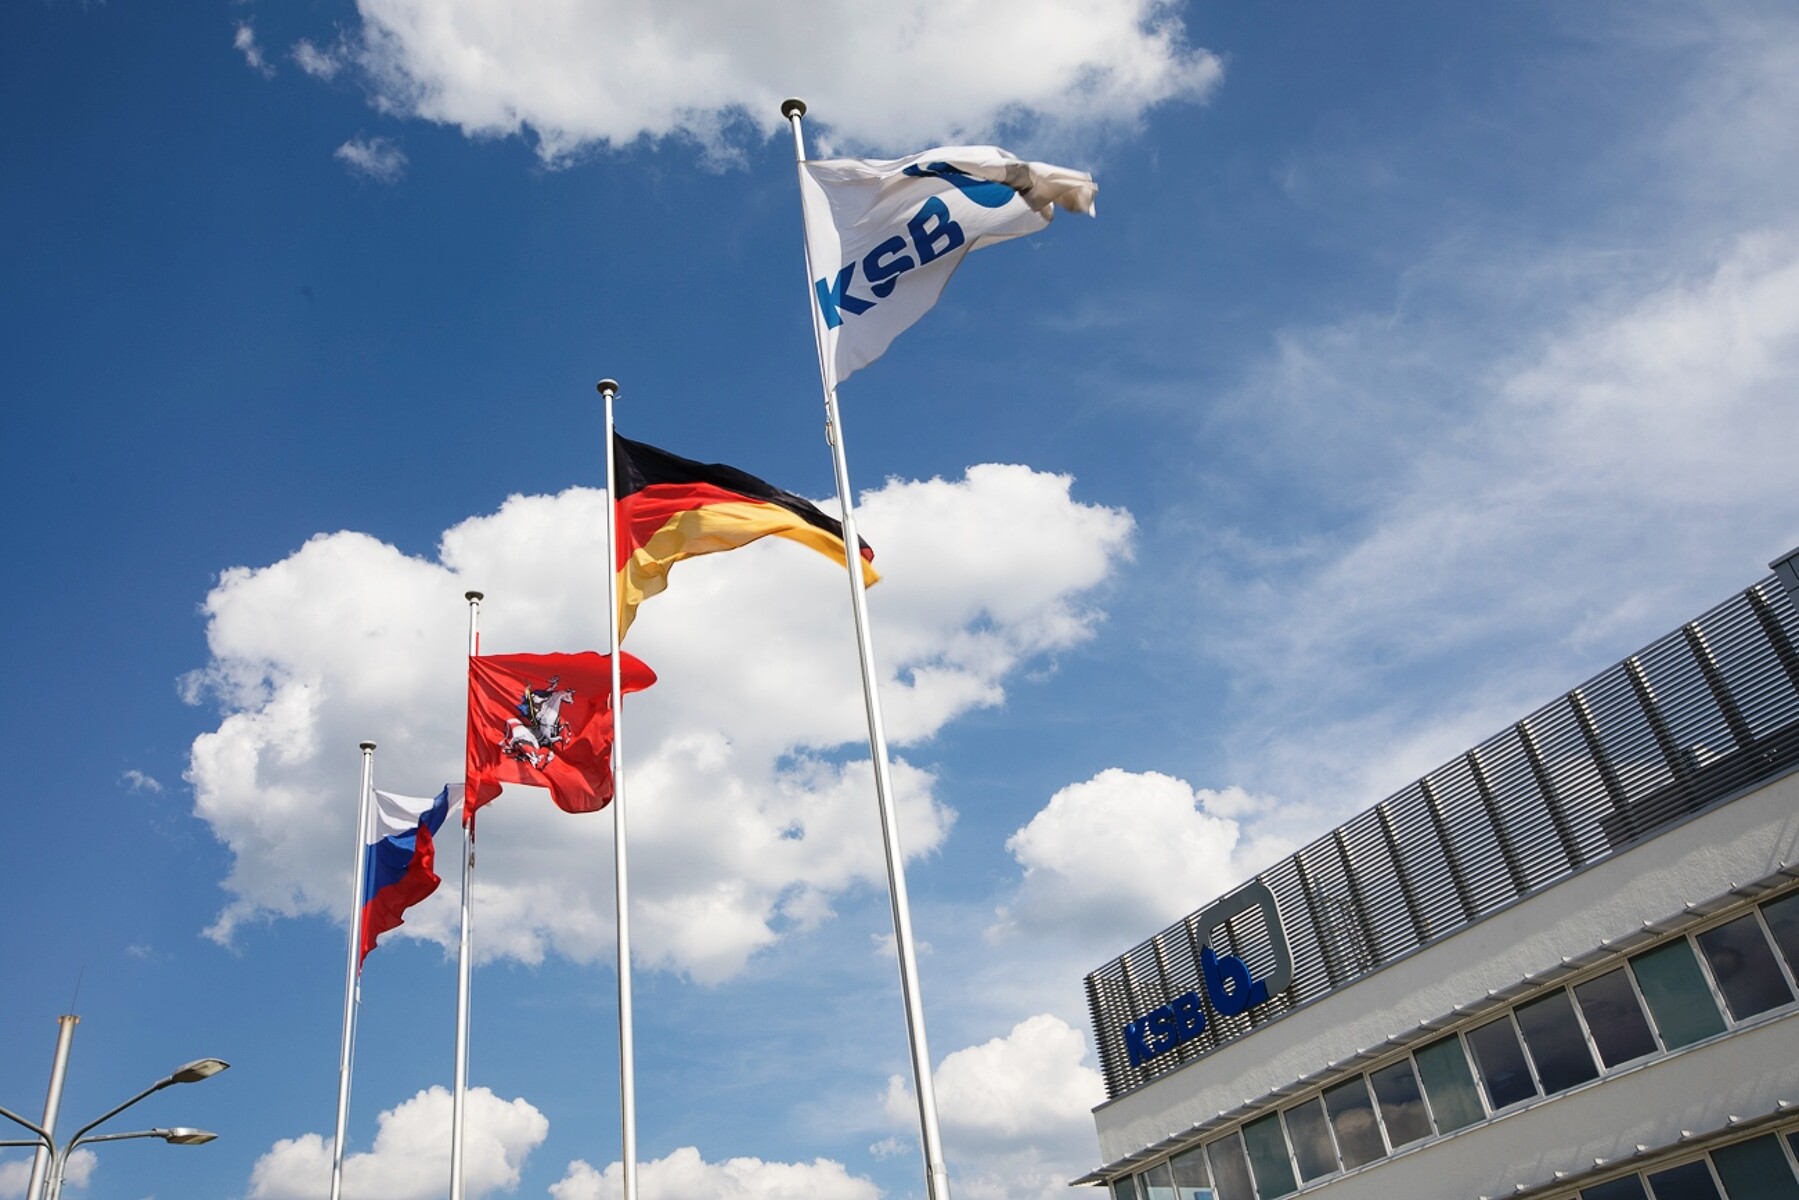 KSB flags in front of blue sky